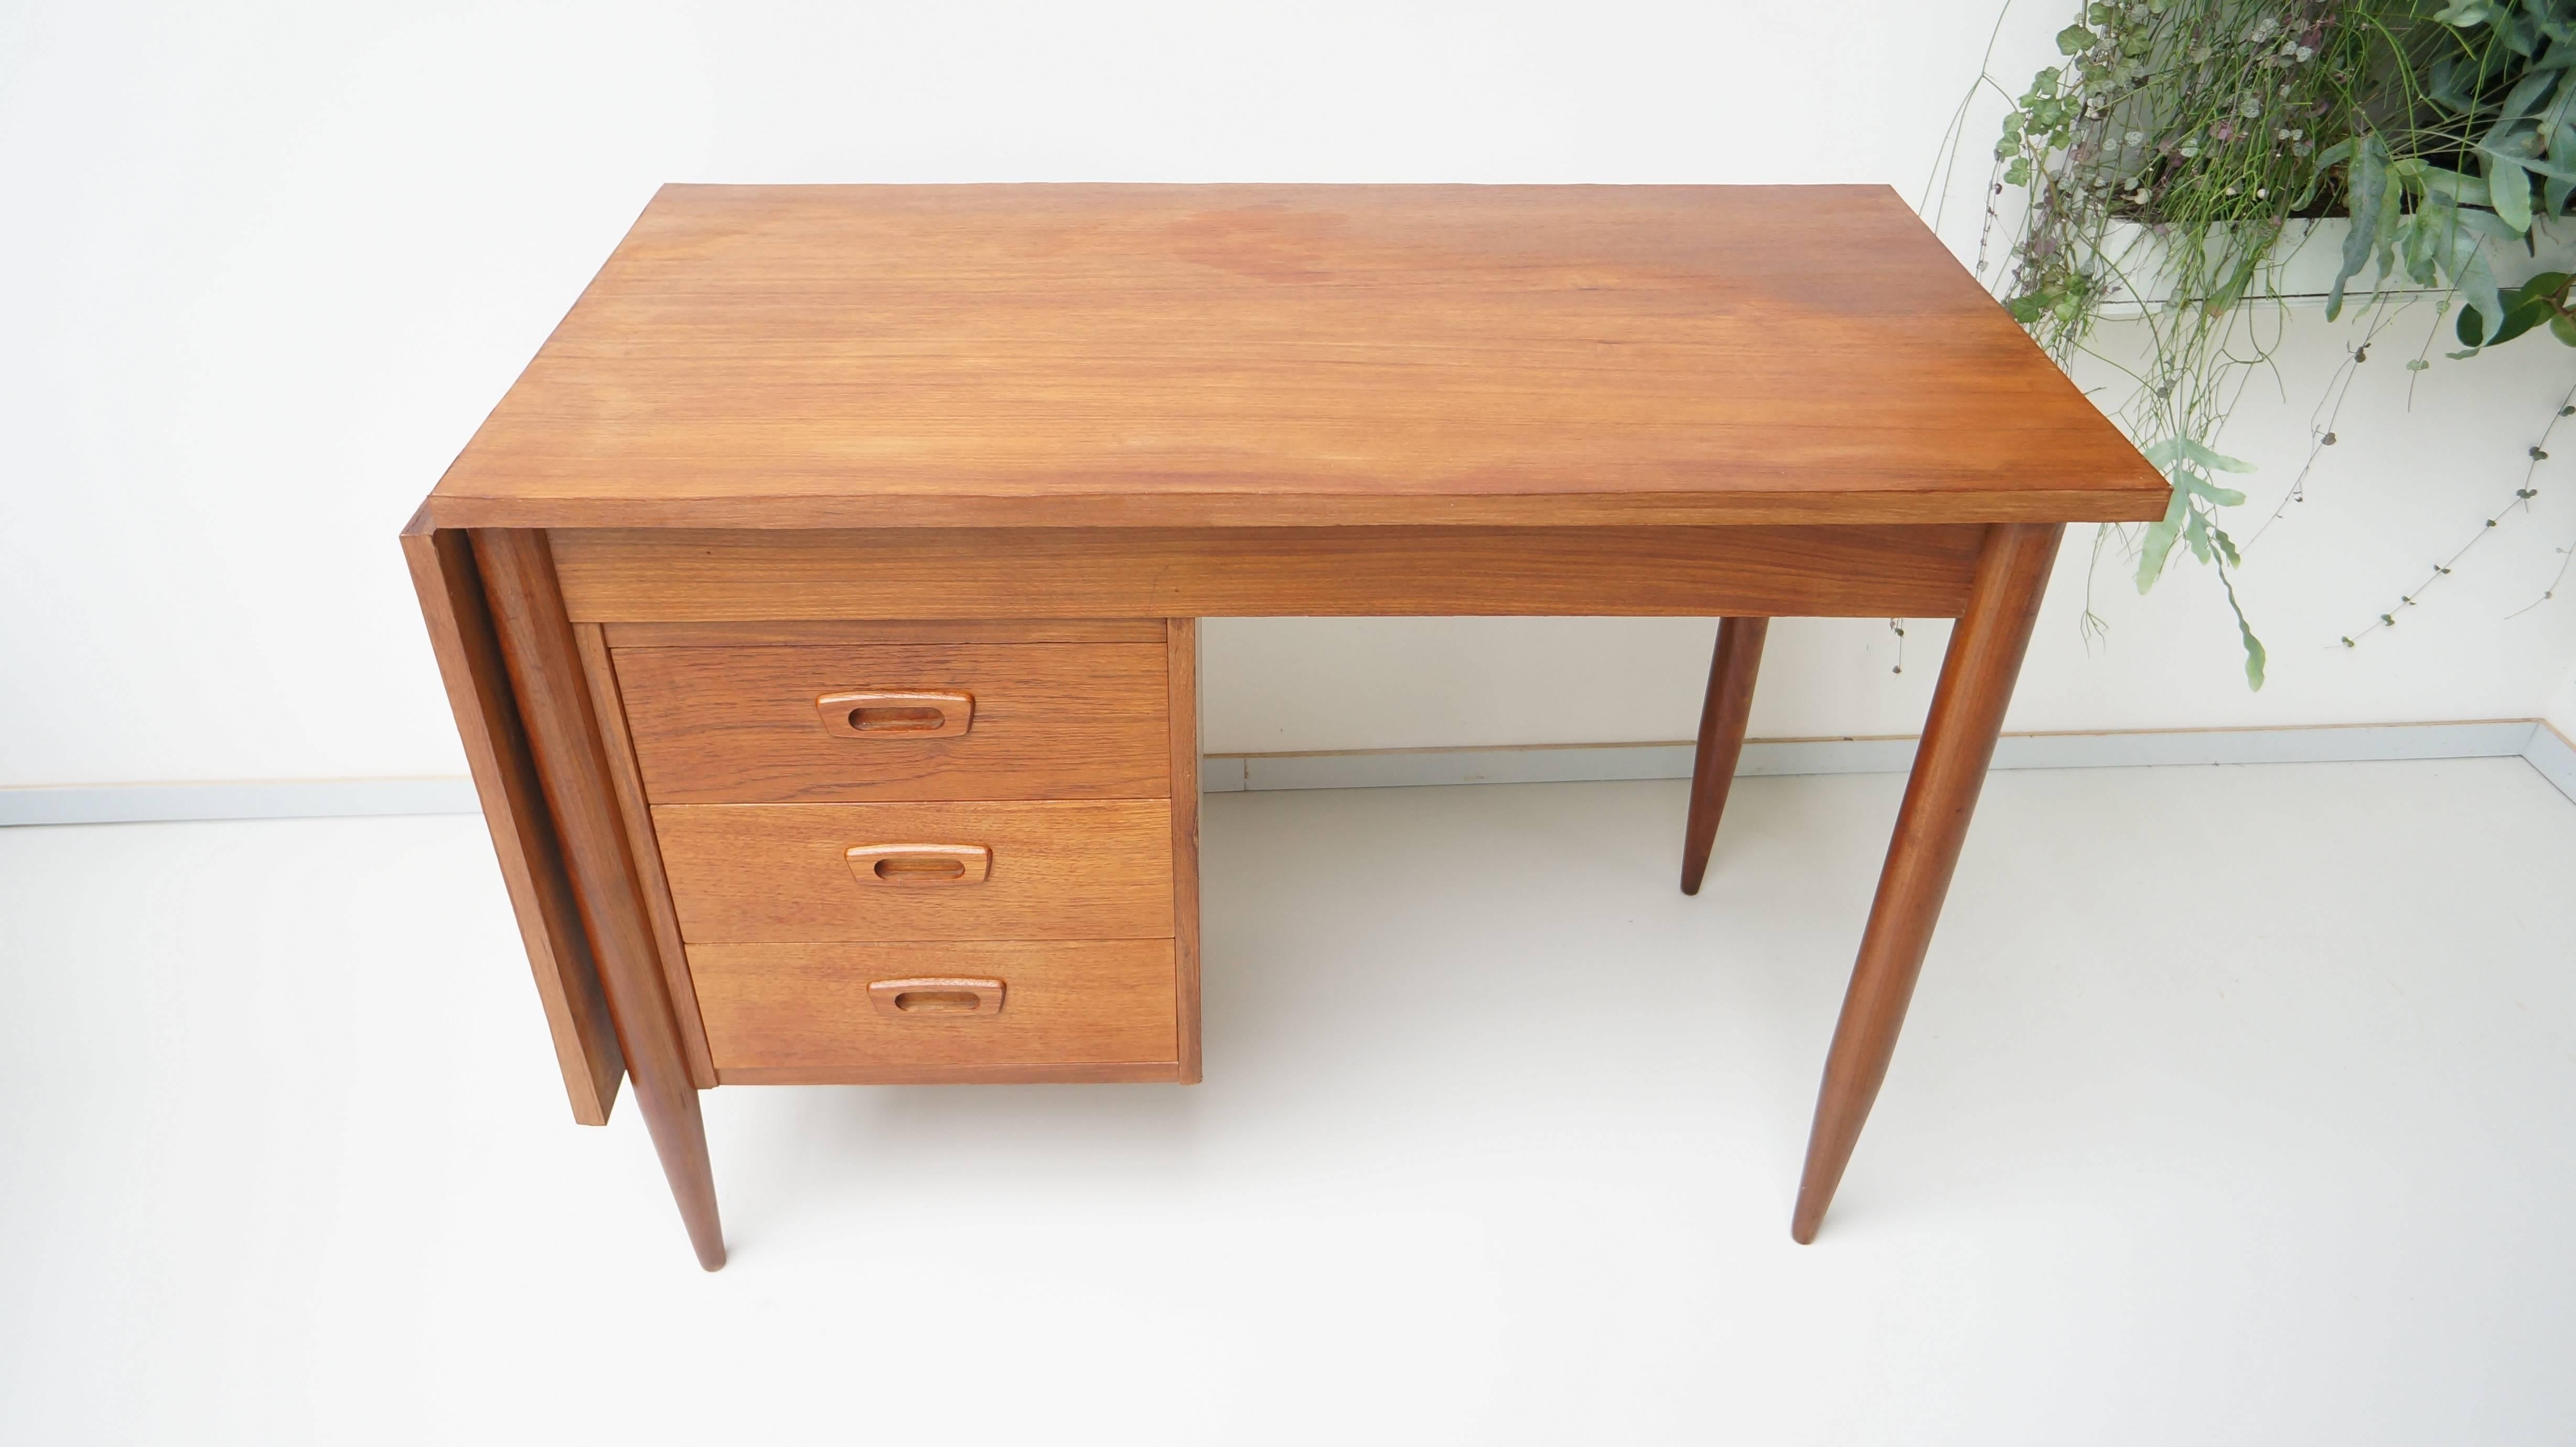 Teak veneer wooden desk from the Danish designer Arne Vodder. The single drawer stack has three drawers with recessed pulls in matching teak wood. The work space has a dropped leaf on the left side. The whole top slides left to support the leaf and